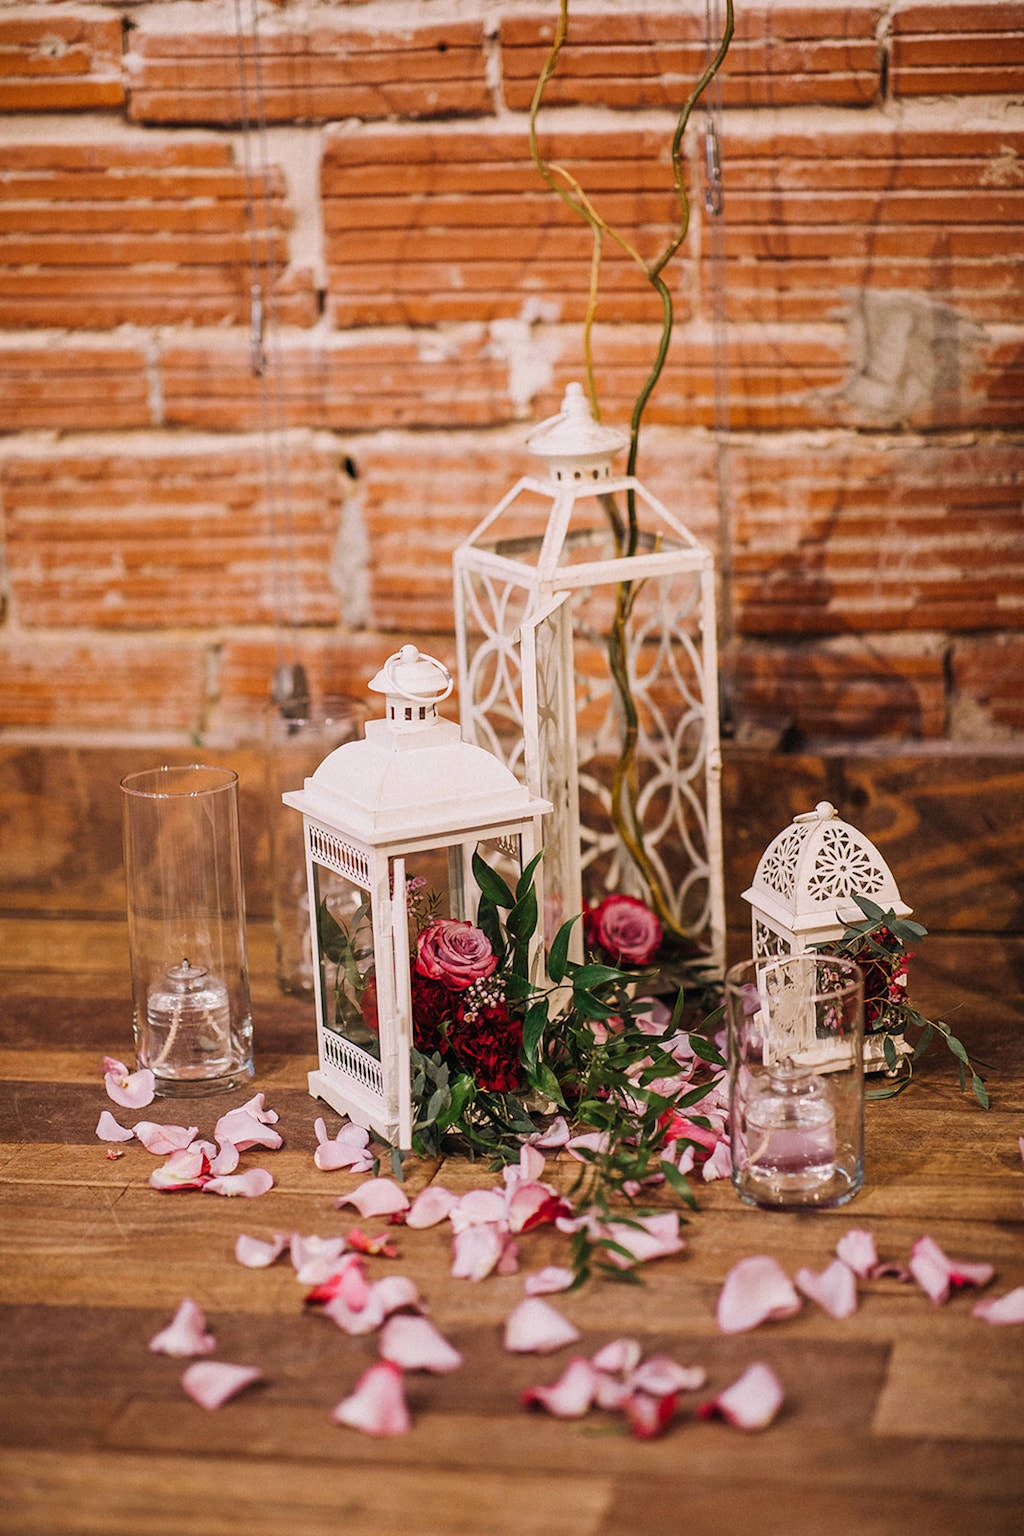 Romantic Vintage White Lanterns with Red Roses and Glass Liquid Candles Wedding Ceremony Decor, in front of Red Exposed Brick Wall | Downtown St. Pete Wedding Venue NOVA 535